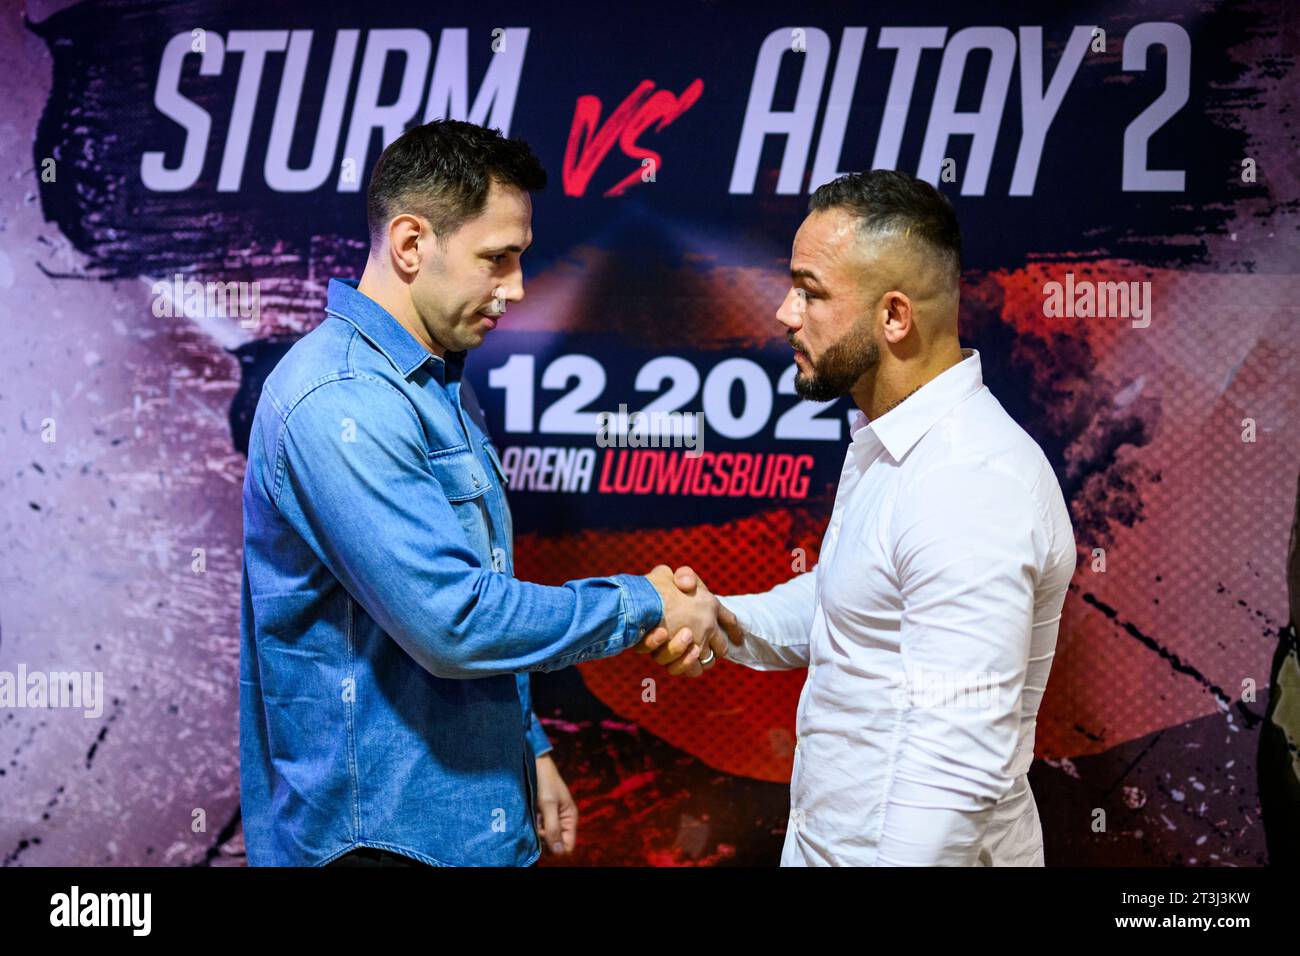 25 October 2023, Baden-Württemberg, Ludwigsburg: Boxing: Press conference Felix Sturm, MHP Arena Ludwigsburg. Felix Sturm (l) and Sükrü Altay (r) stand in front of the fight poster after the press conference. Photo: Tom Weller/dpa Stock Photo